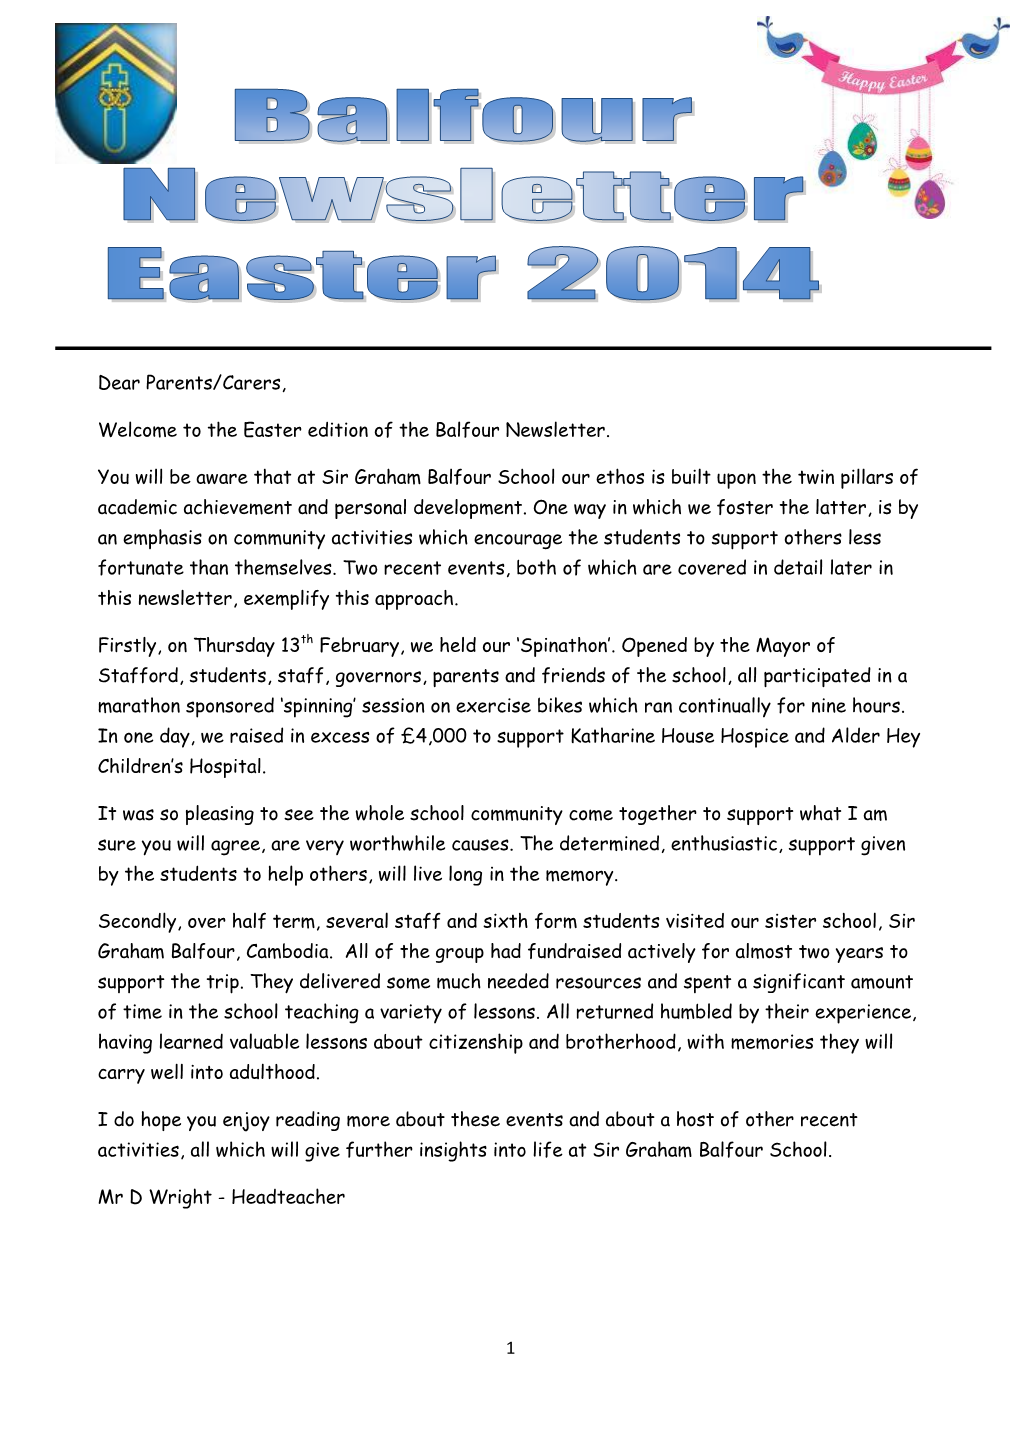 1 Dear Parents/Carers, Welcome to the Easter Edition of the Balfour